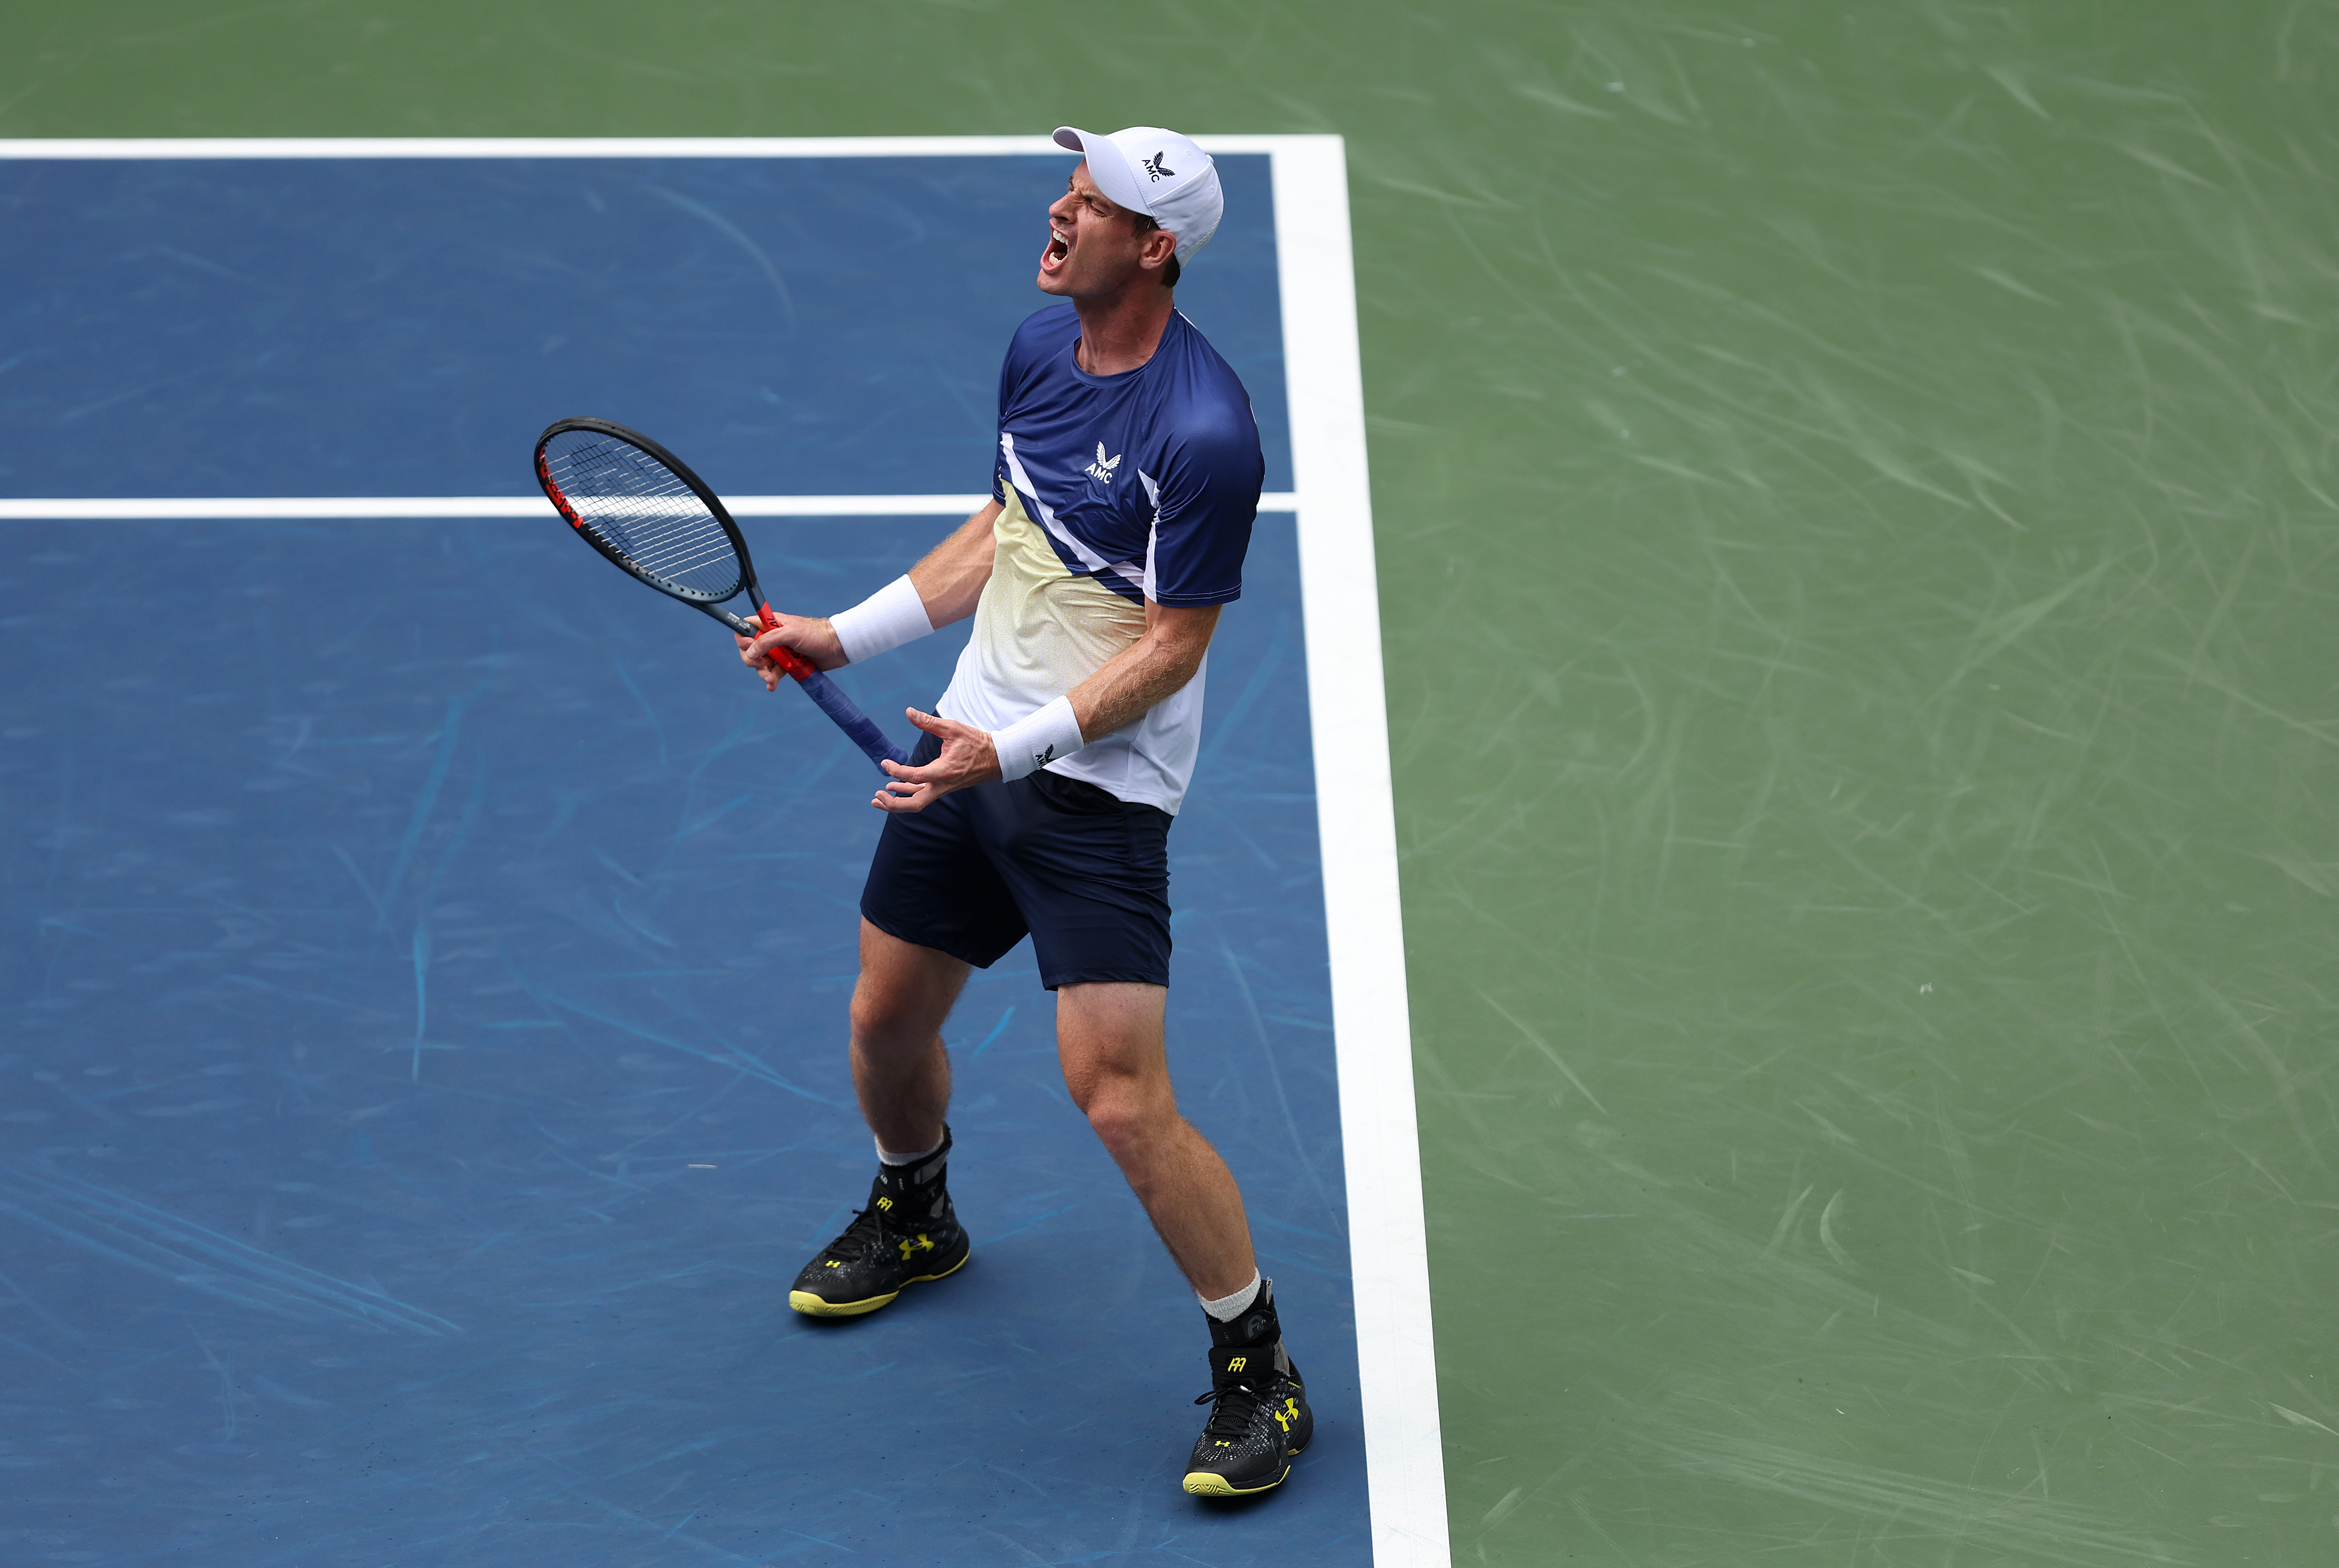 How to watch Andy Murray at US Open 2022